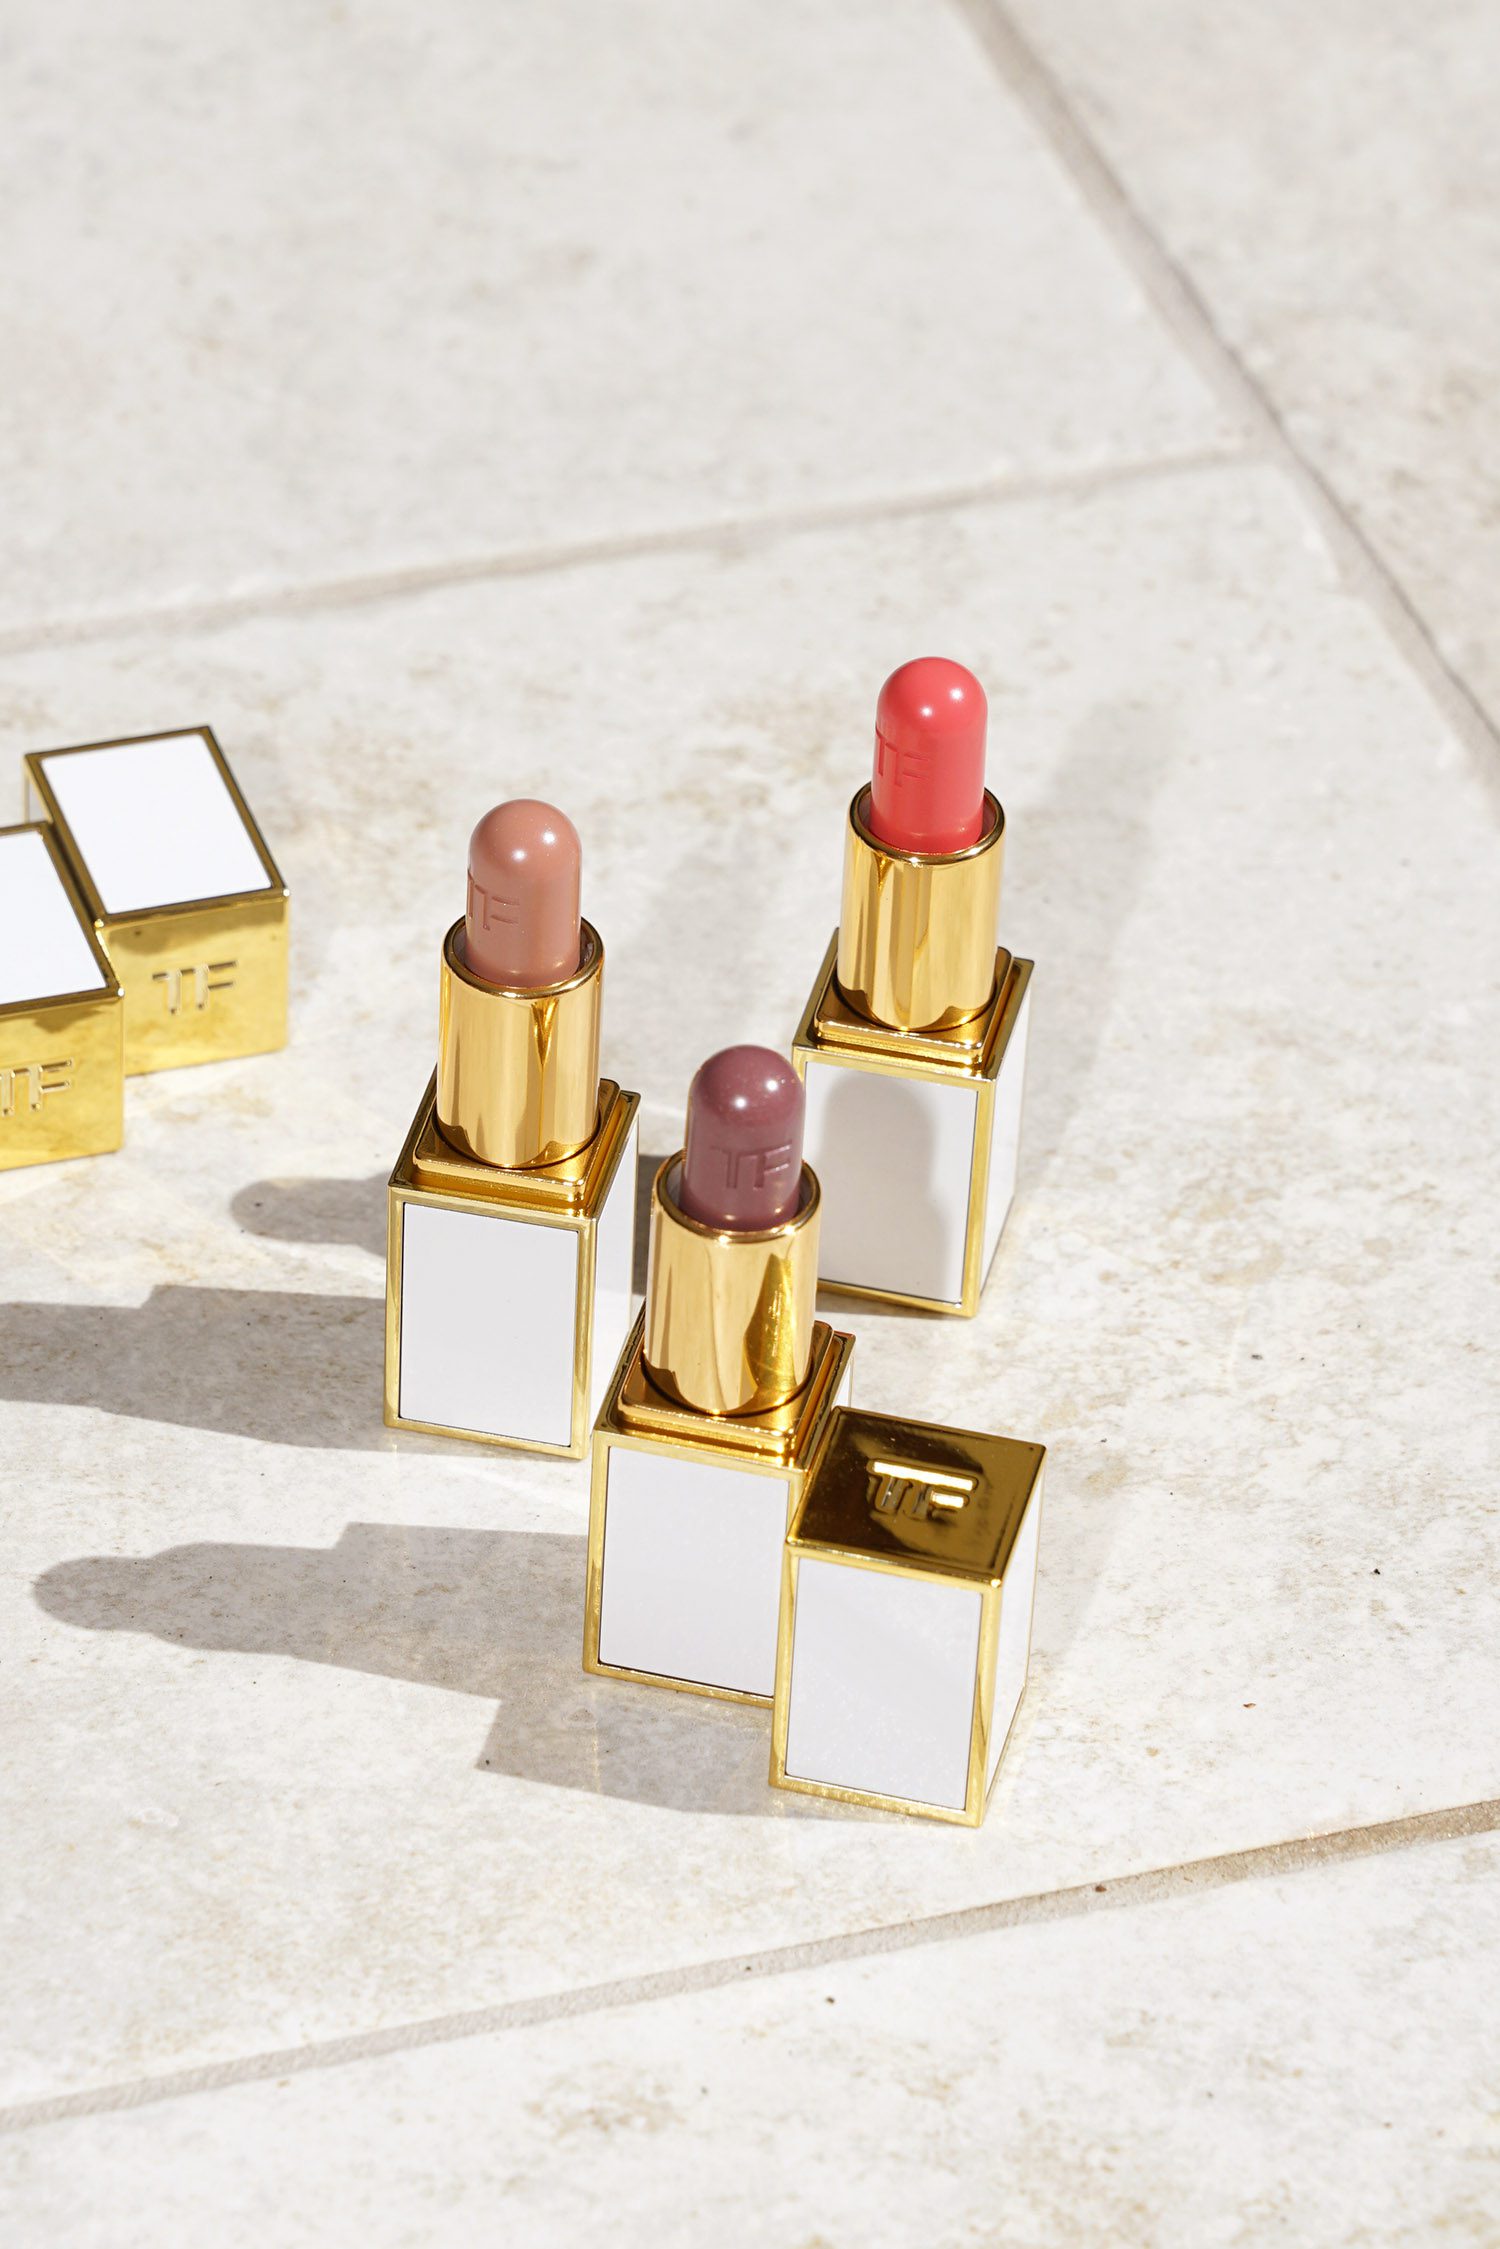 Tom Ford Beauty Soleil Neige Collection - The Beauty Look Book